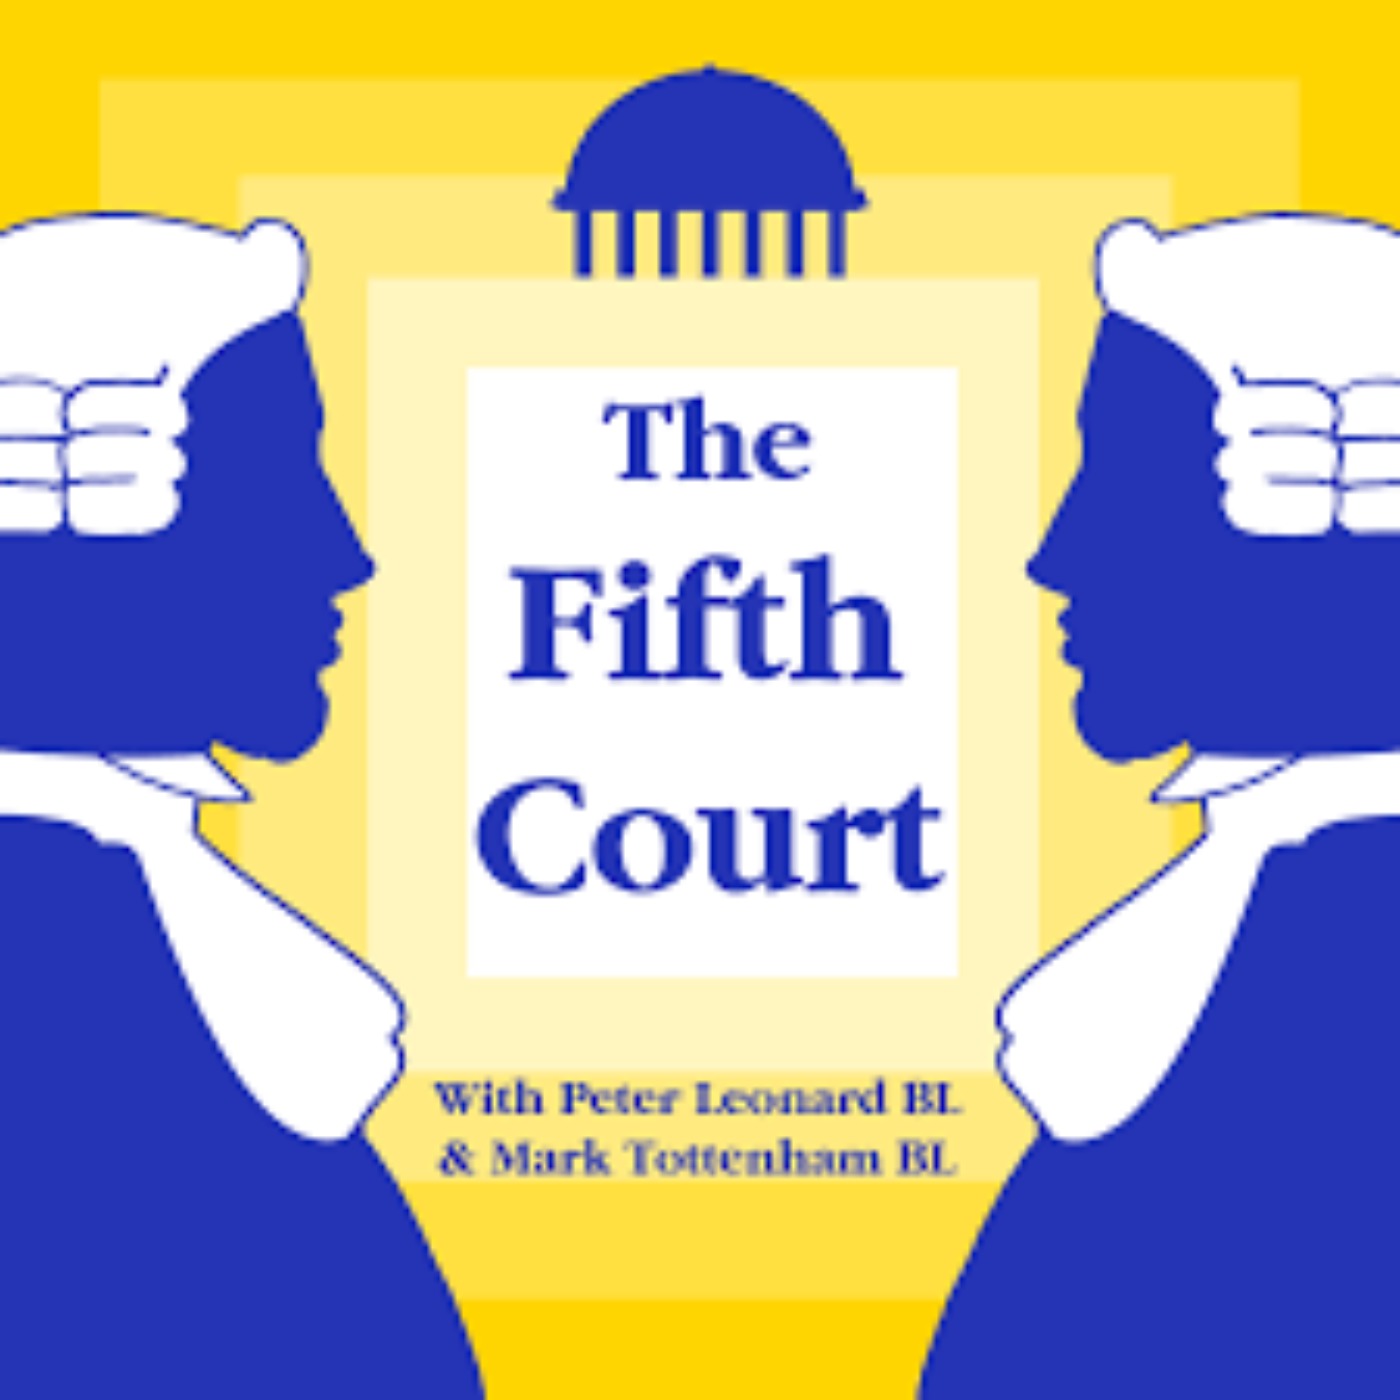 E78 The Fifth Court - The Bloomsday Episode - Hosts Mark Tottenham BL and Peter Leonard BL on Ulysses and the obscenity laws